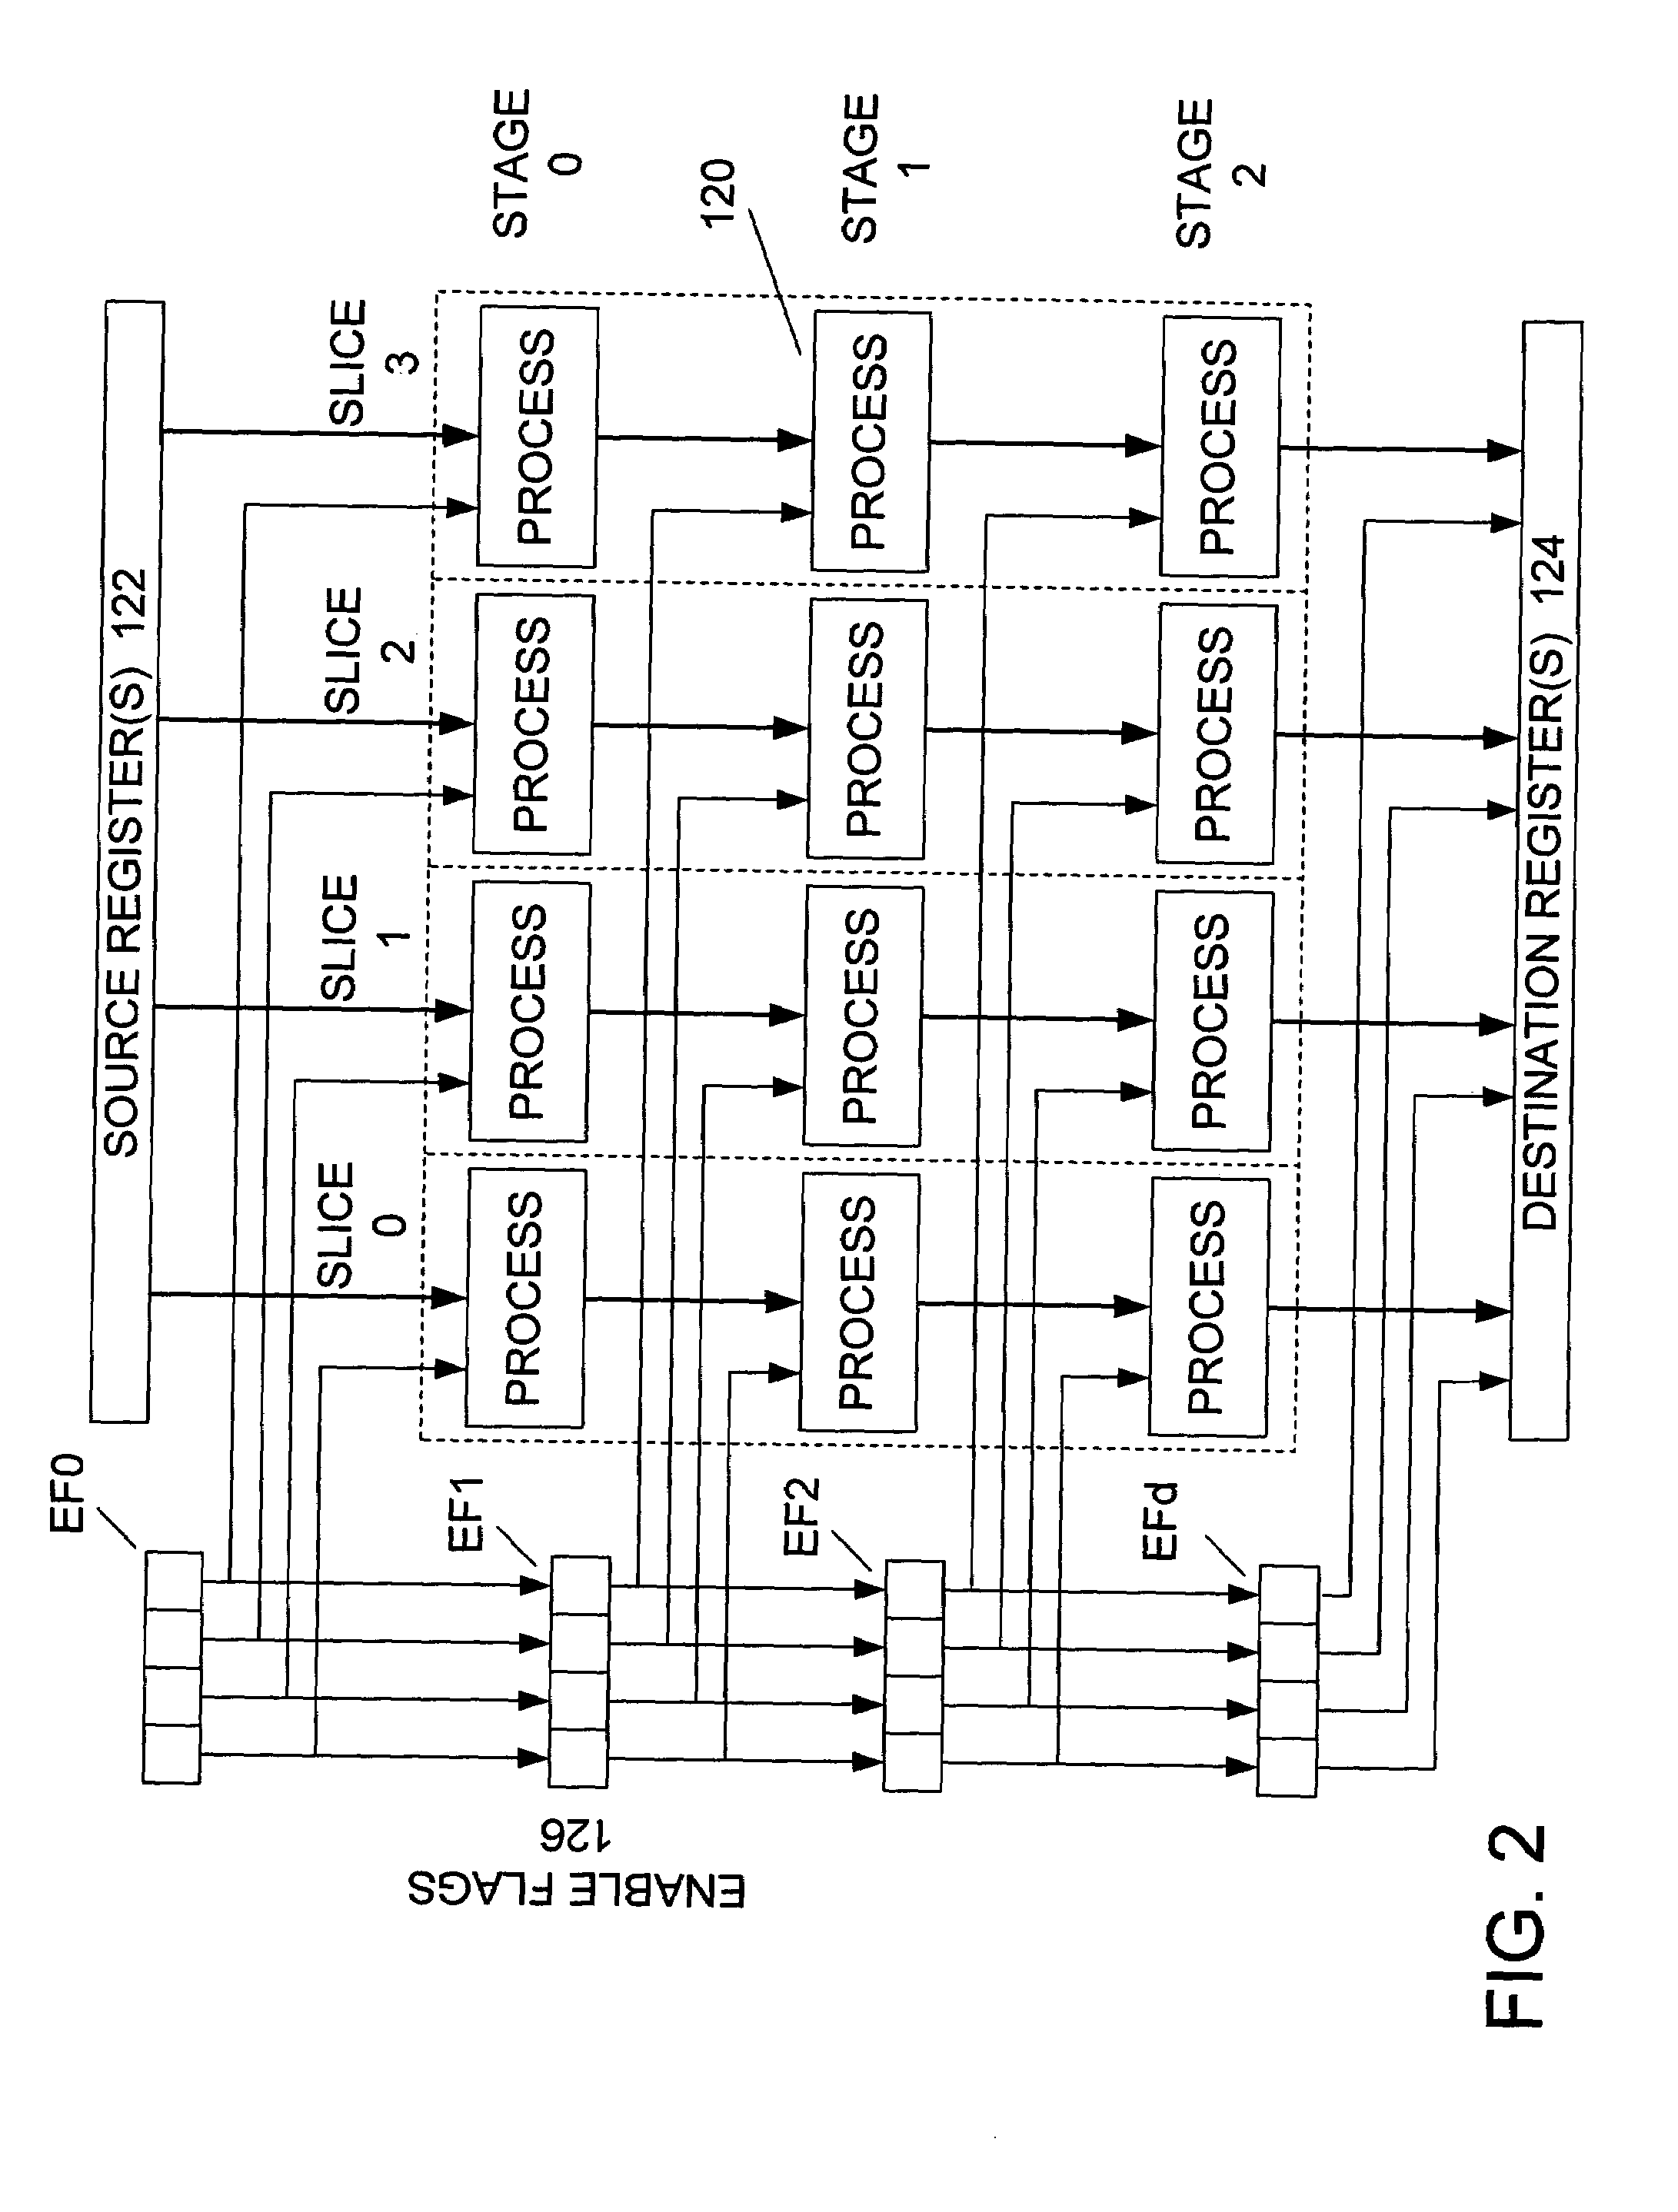 Method and apparatus for enable/disable control of SIMD processor slices